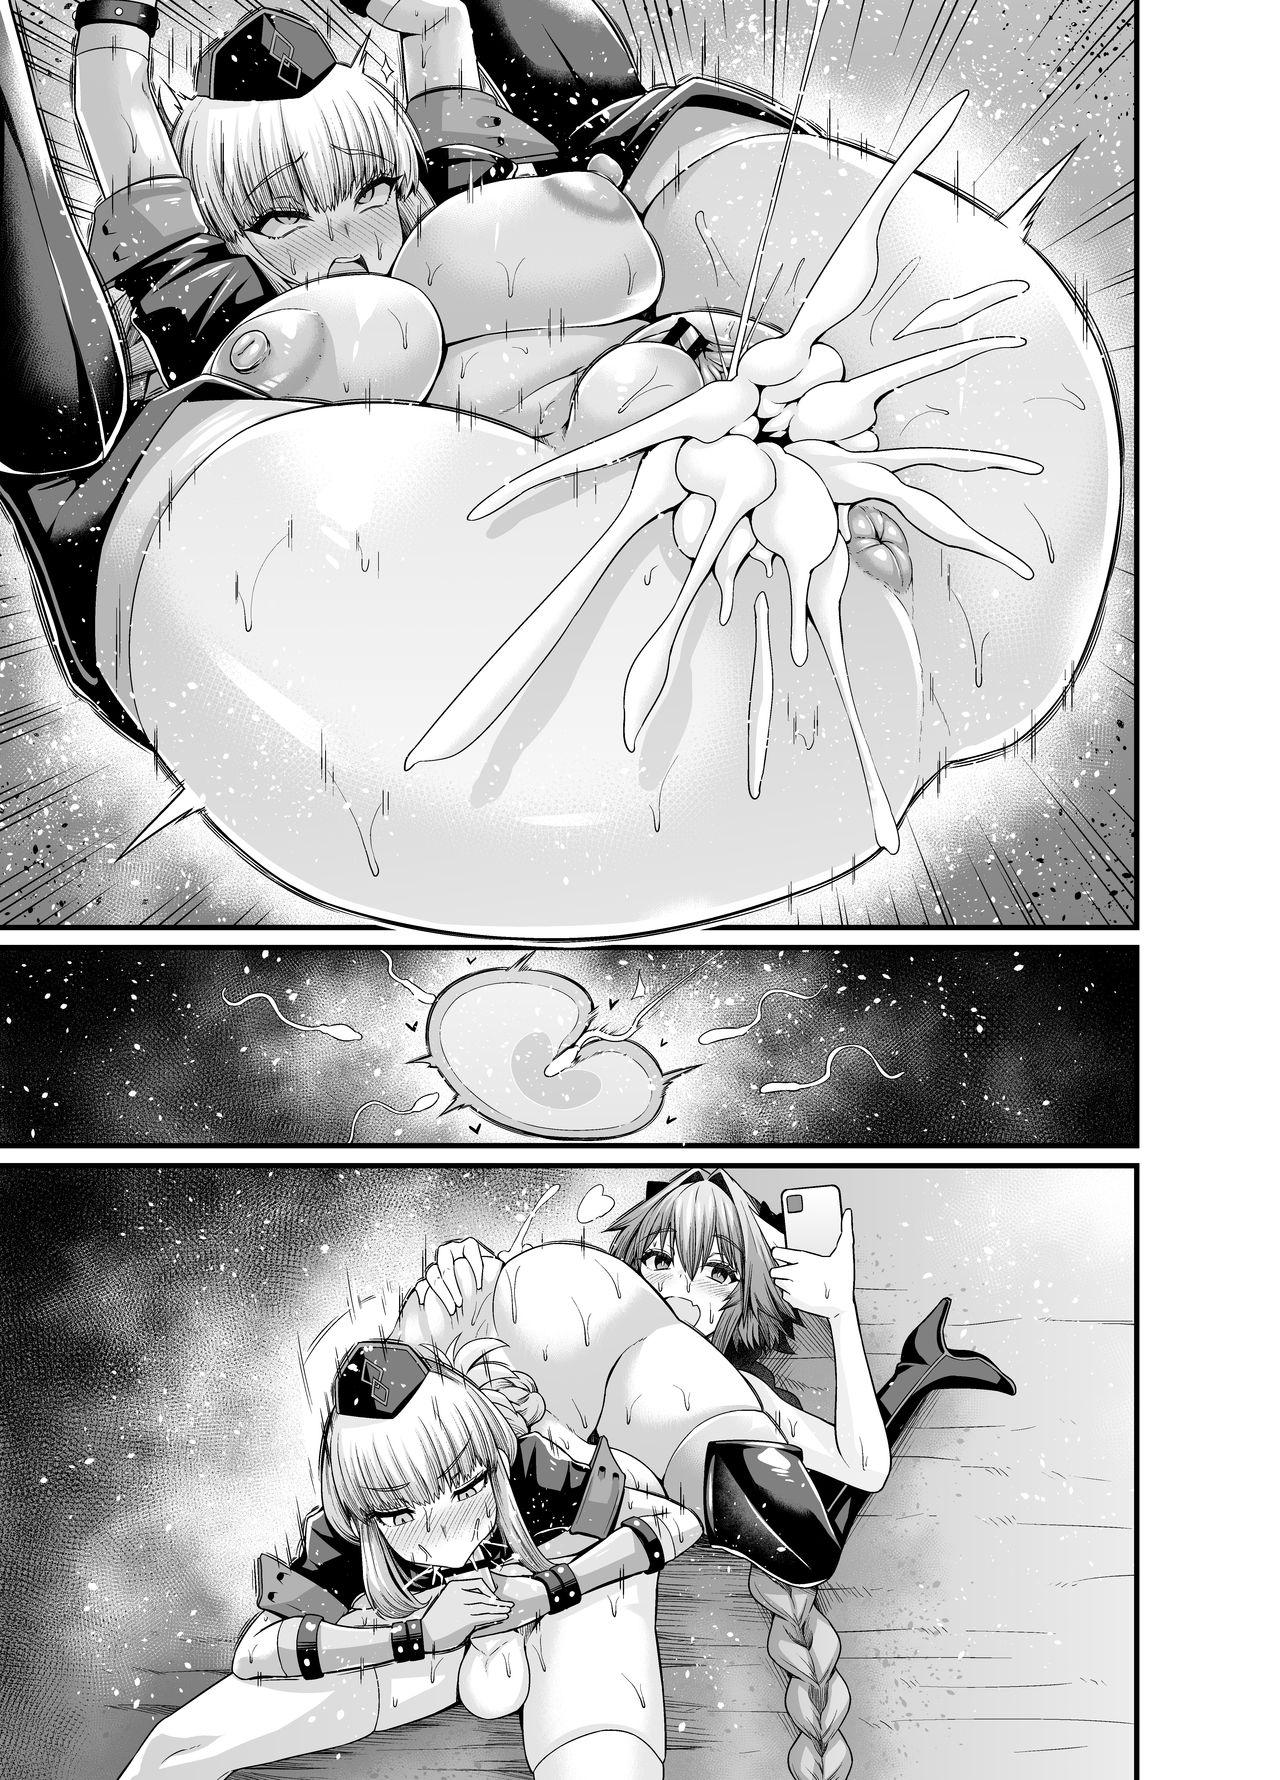 Tight Pussy Nightingale, Astolfo no Chiryou o Suru - Fate grand order Teenporn - Page 8